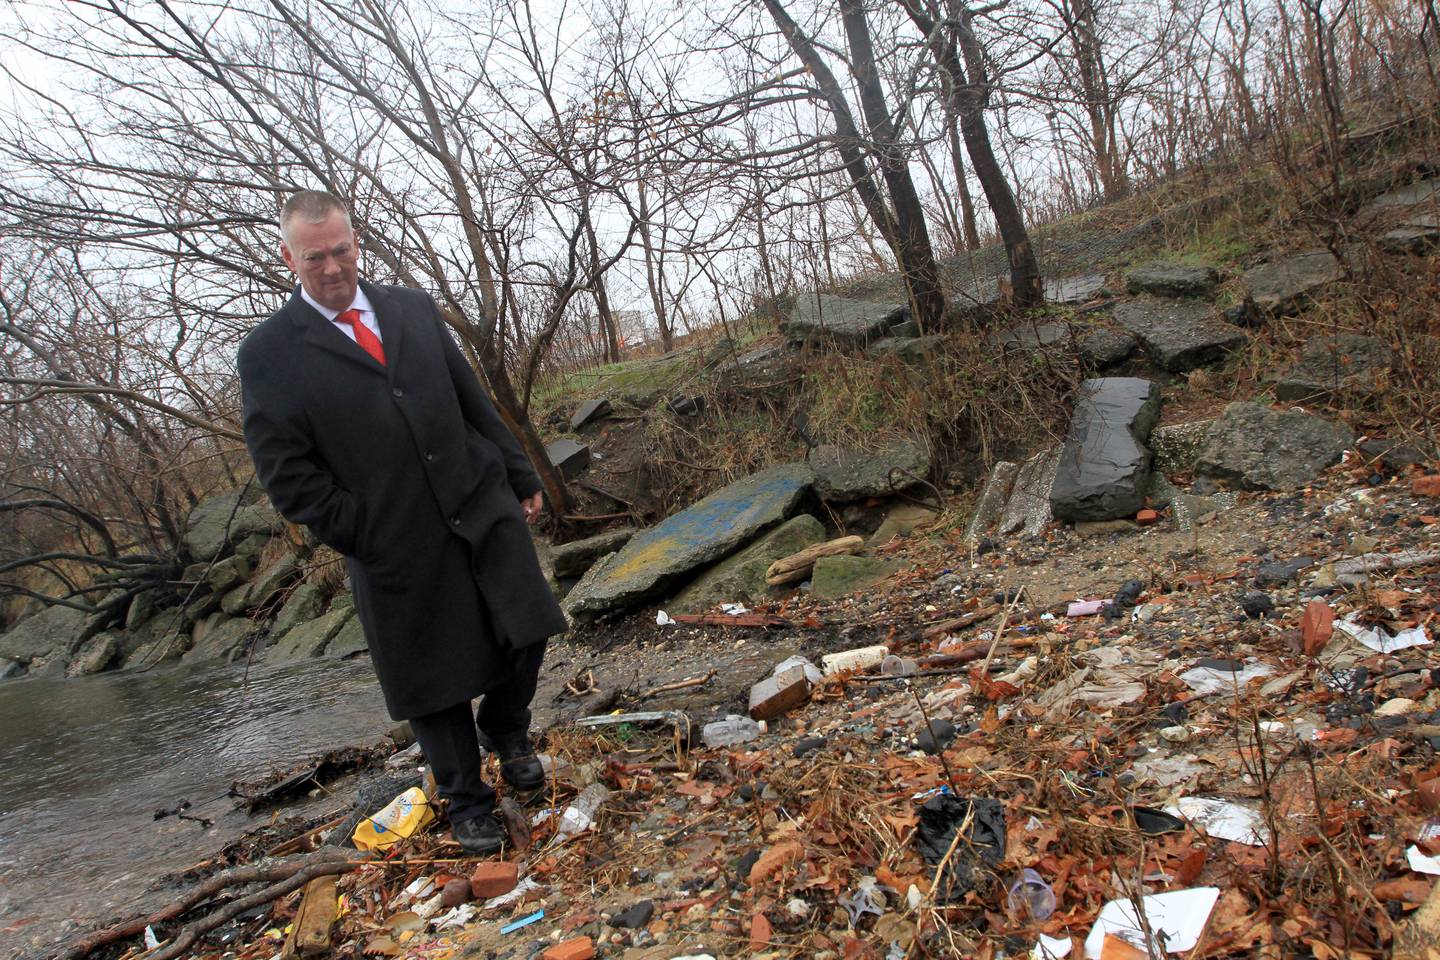 Brooklyn South Homicide Squad Detective Timothy O'Brien visits the scene at Calvert Vaux Park near the Coney Island inlet, where the scattered severed remains of an unknown woman were recovered in January 2015.